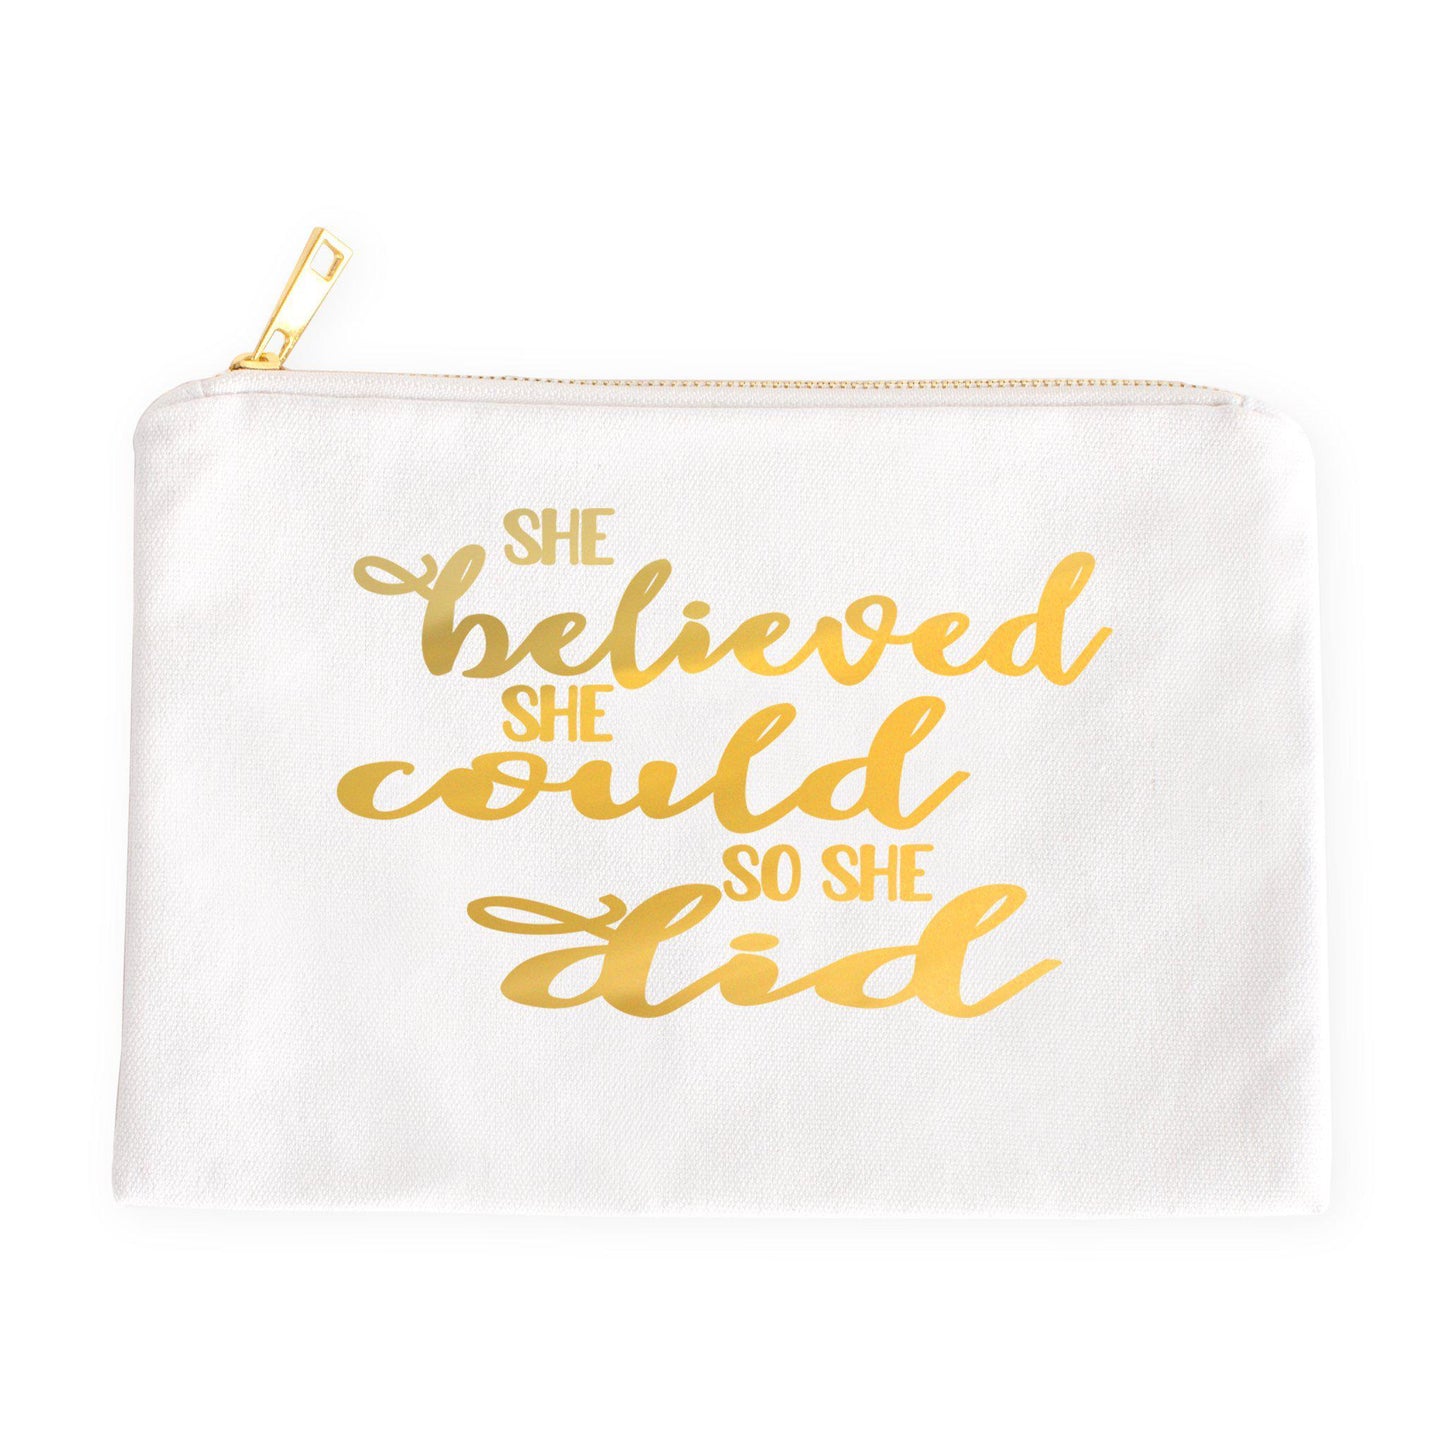 She Believed She Could So She Did Gold or Silver Foil Canvas Pouch in Black, Pink, or White-Luxe Palette